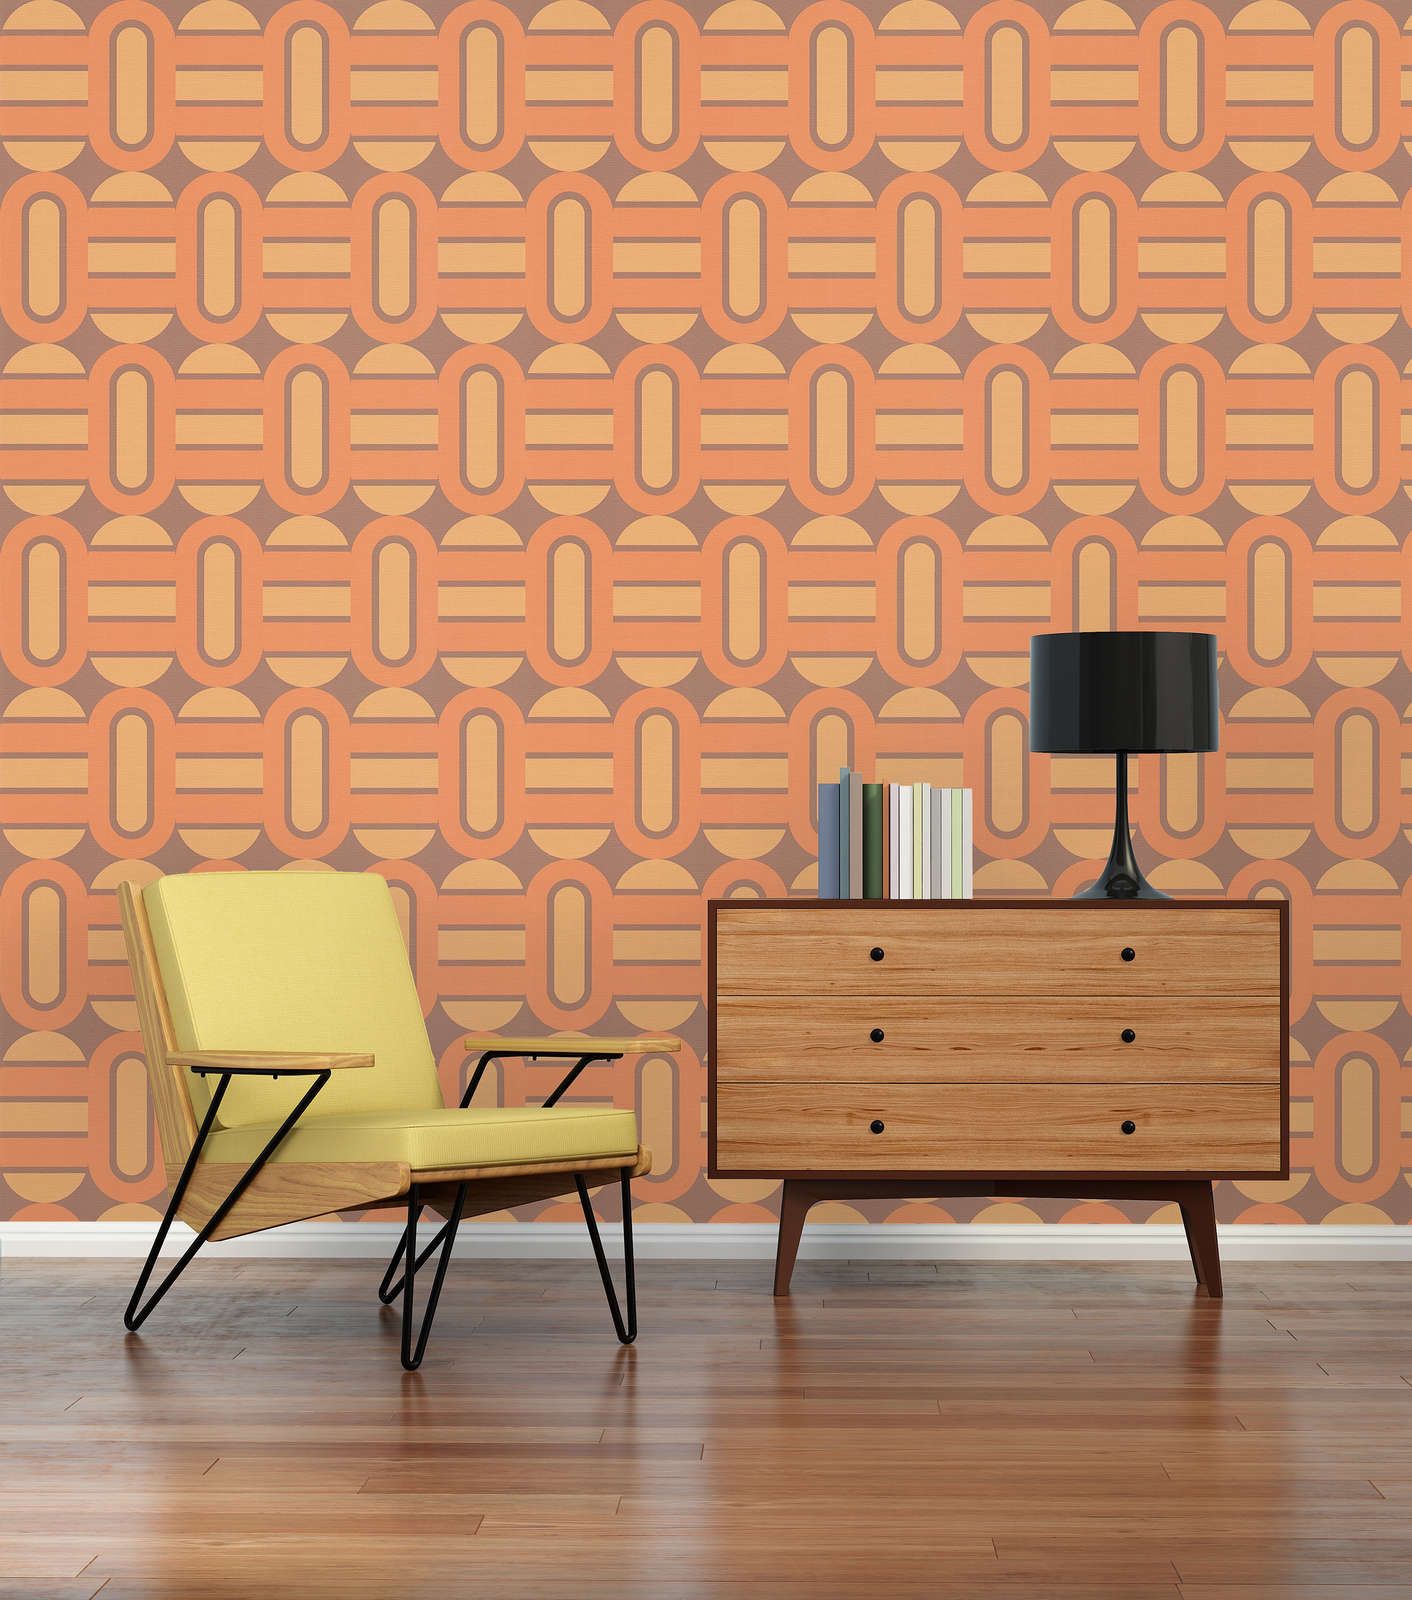             A.S. Création Wallpaper Retro Chic
        